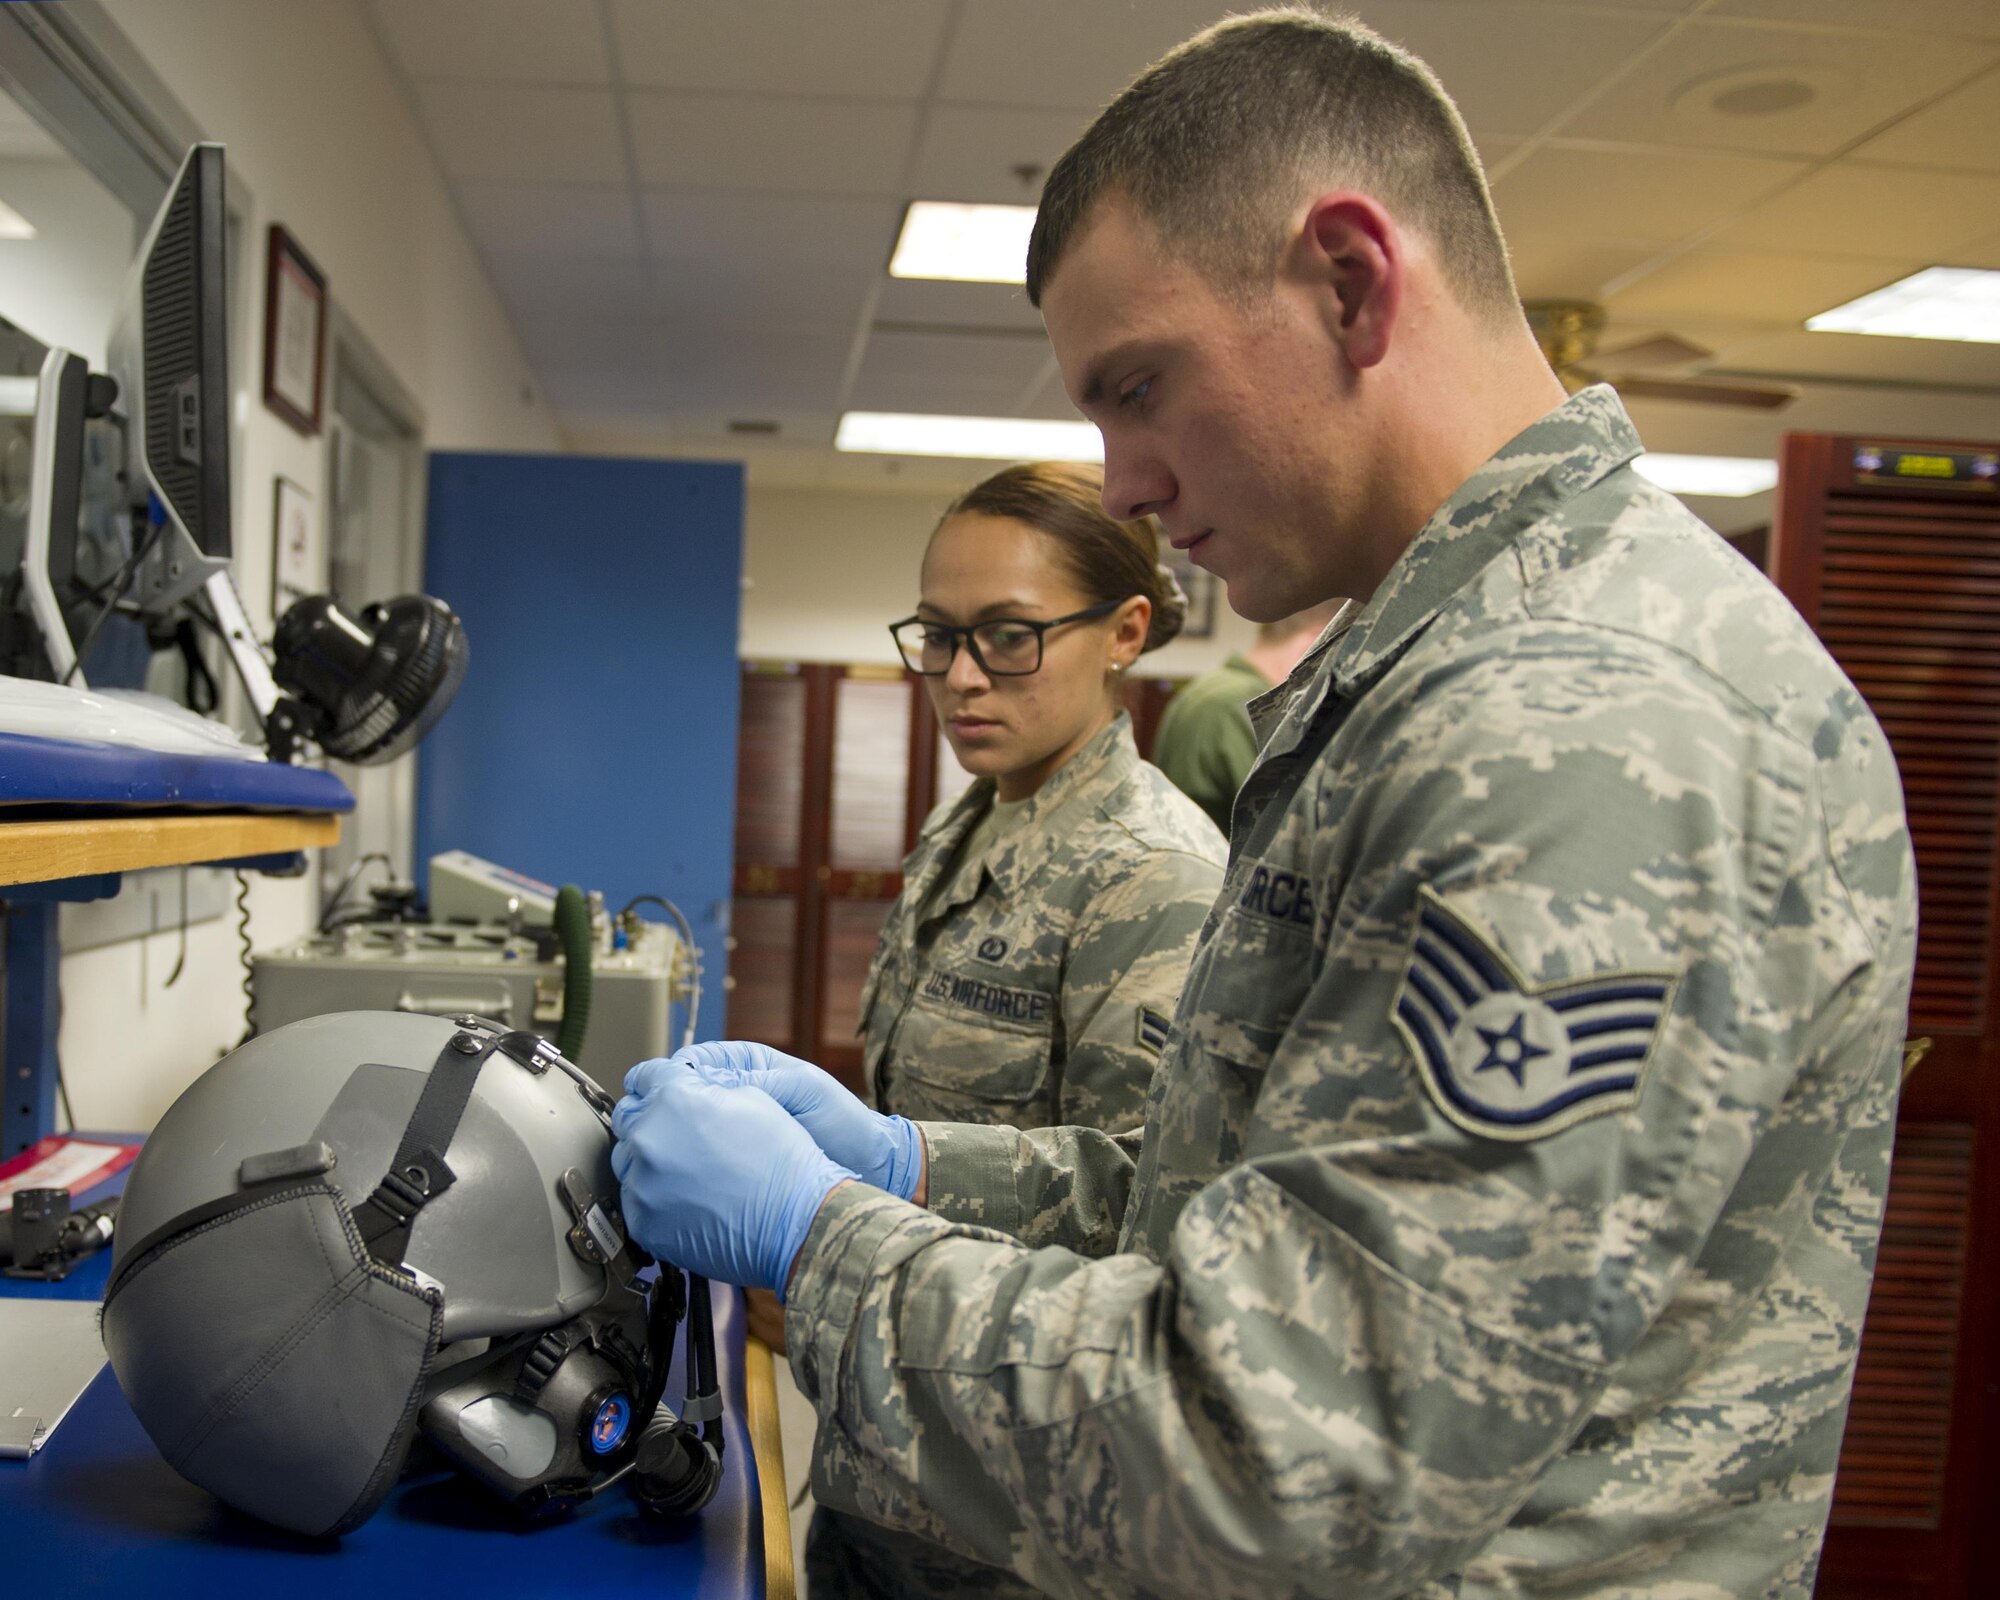 Staff Sgt. Kody Crider and Airman 1st Class Cortney Oehlbeck, 325th Operations Support Squadron/43rd Fighter Squadron Aircrew Flight Equipment technicians, repair a pilot’s helmet April 7, at the 43rd FS. The AFE shop is much like a detachment, comprised of a rotation of 325th OSS Airmen who spend a year at the shop inspecting and maintaining all of the 43rd FS F-22 Raptor pilots’ life support equipment. (U.S. Air Force photo by Senior Airman Alex Fox Echols III/Released)